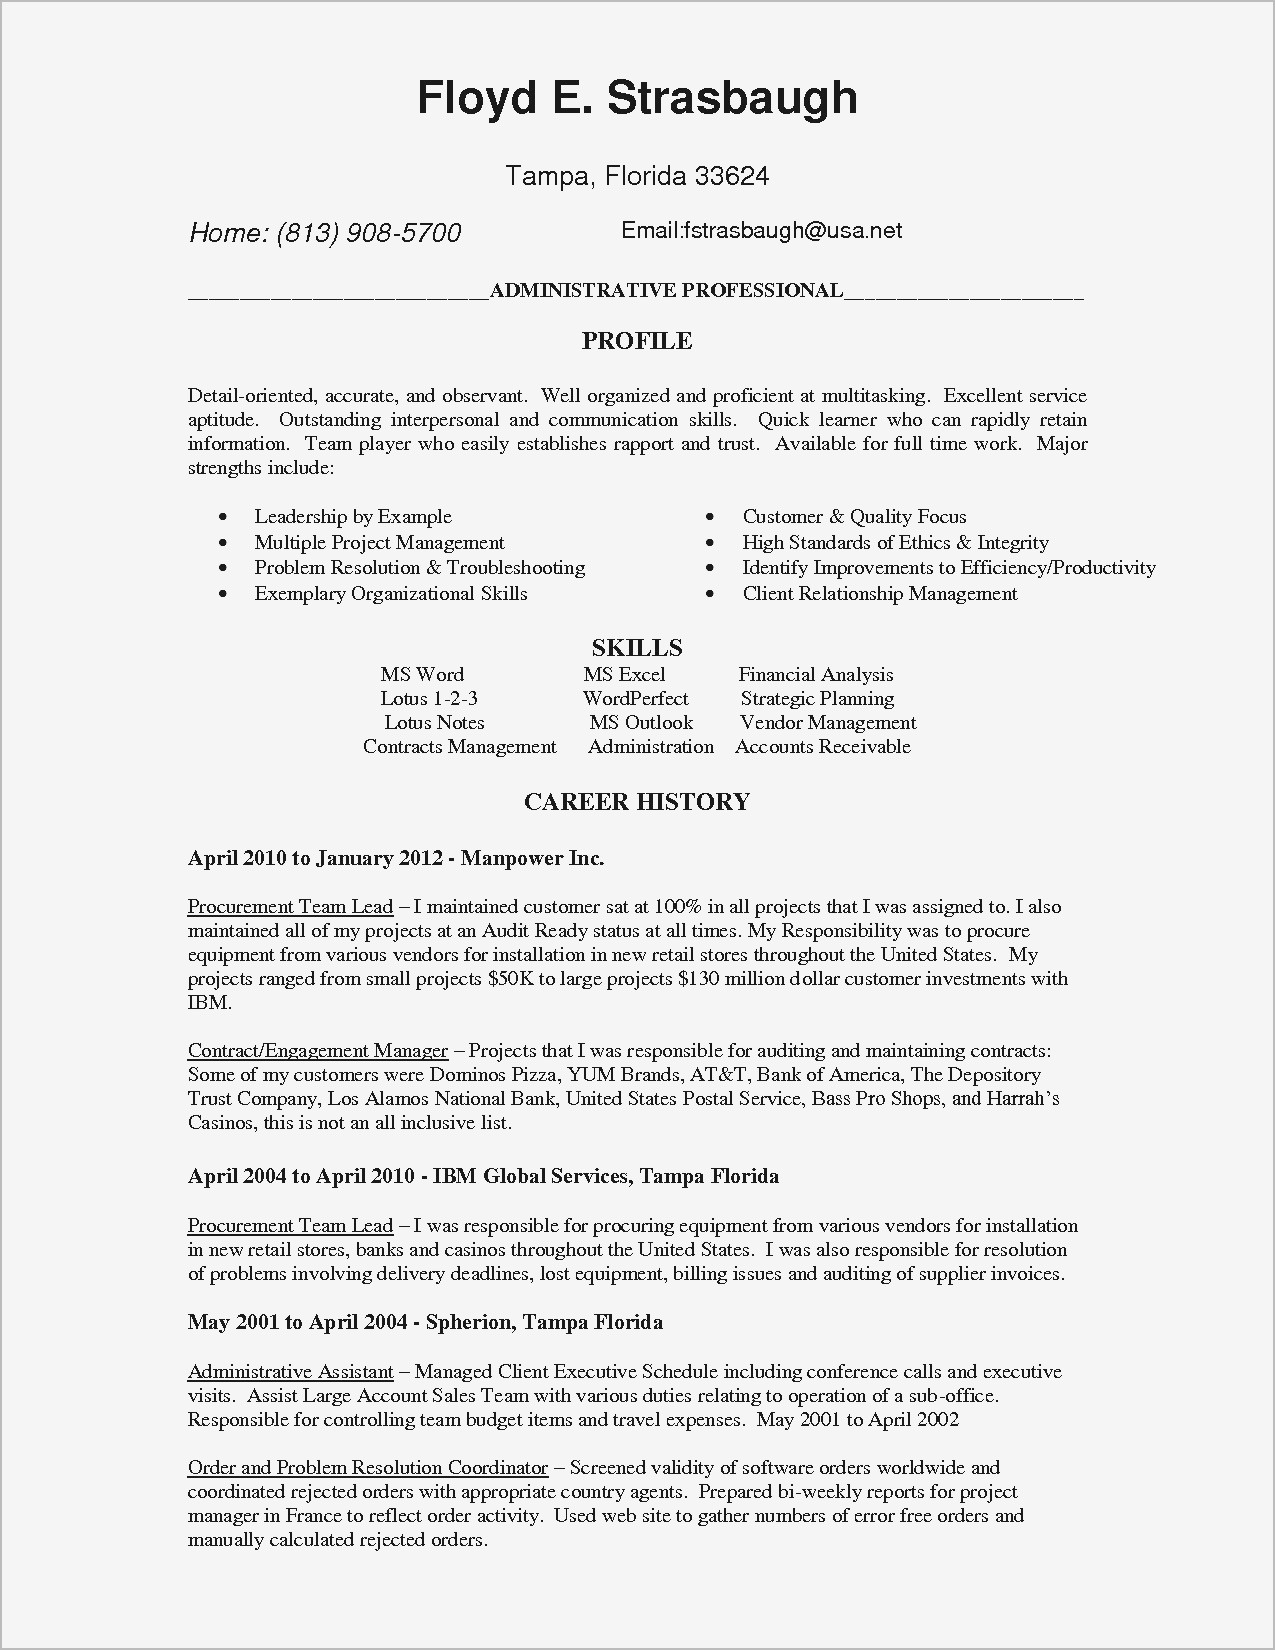 Excellent Cover Letter Template - Cover Letter Template for Resume Pdf format